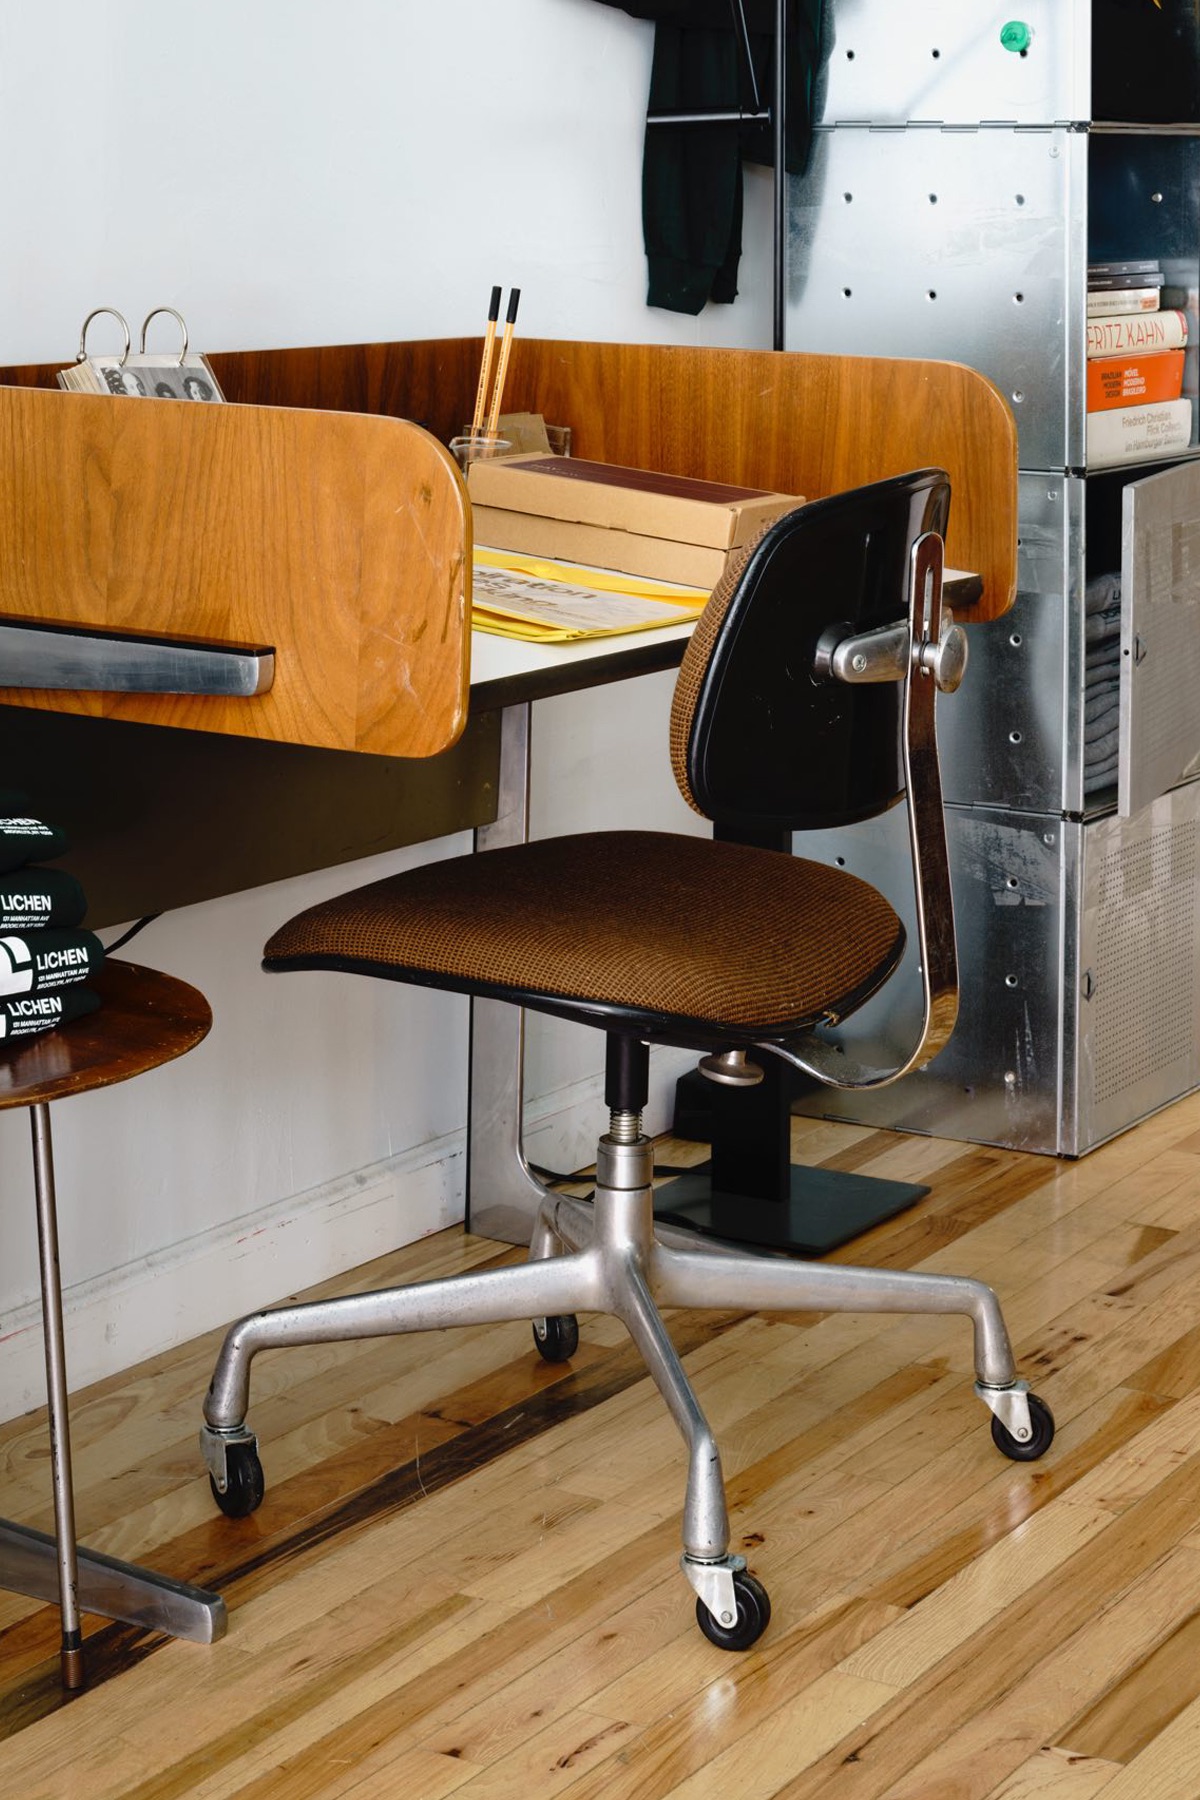 A vintage Secretarial Chair designed by Charles and Ray Eames.